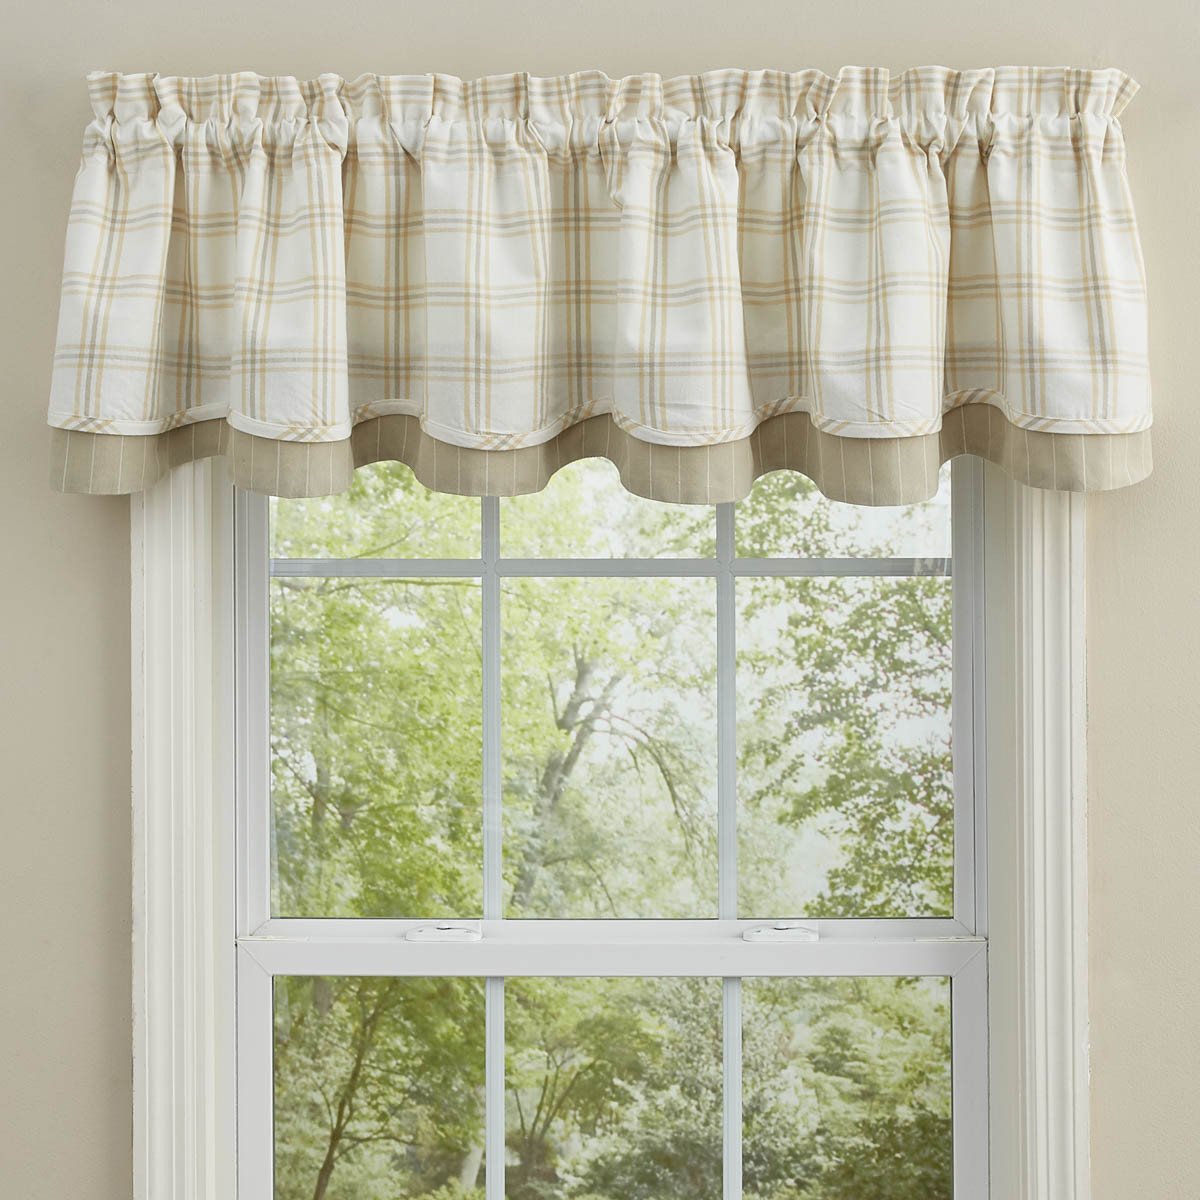 Park Designs Cocoa Butter, Taupe, Ivory Plaid Lined/Unlined Window Valances - 72 x 14/16 Inches - Olde Church Emporium